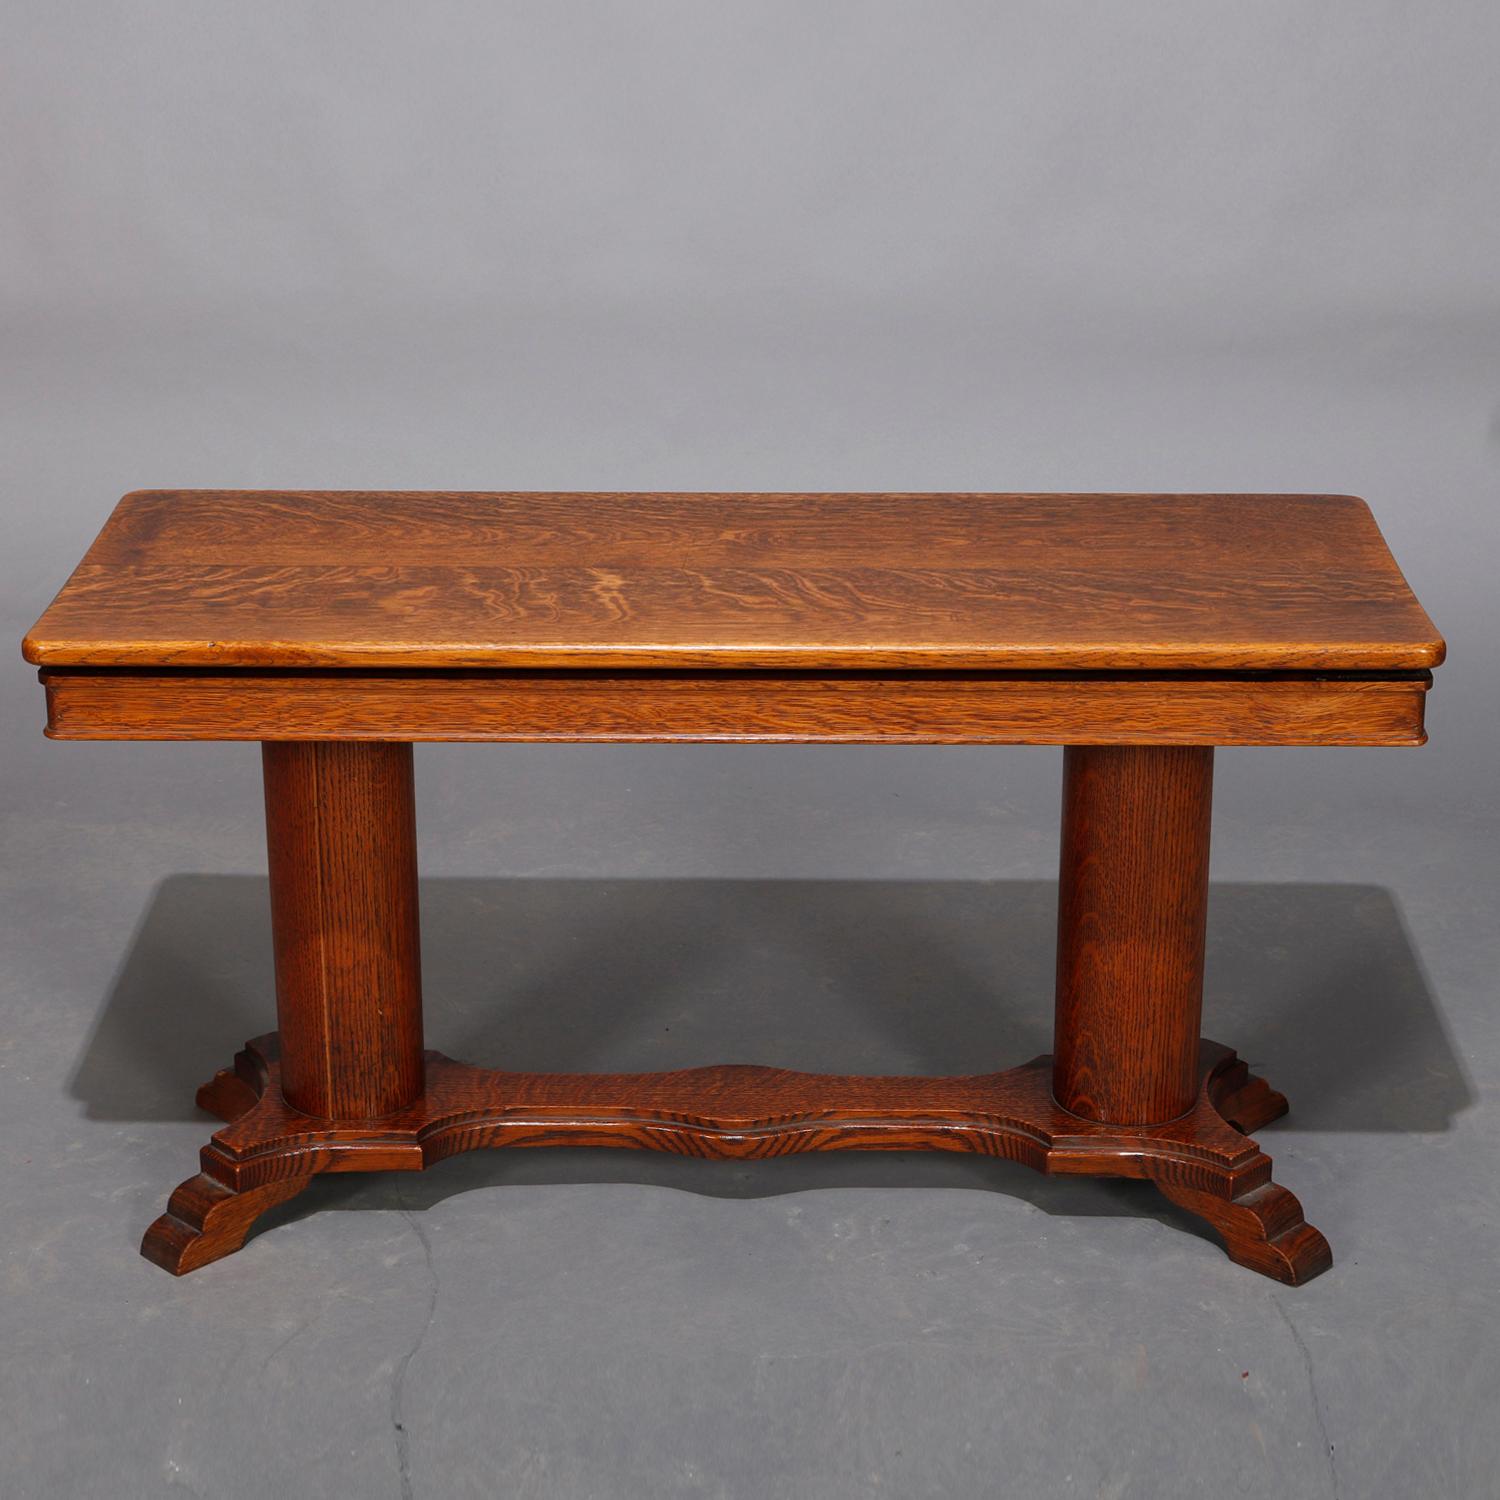 An antique American Empire piano bench offers lift top seat surmounting double pedestal base having shaped stretcher and stepped feet, 20th century

Measures: 21